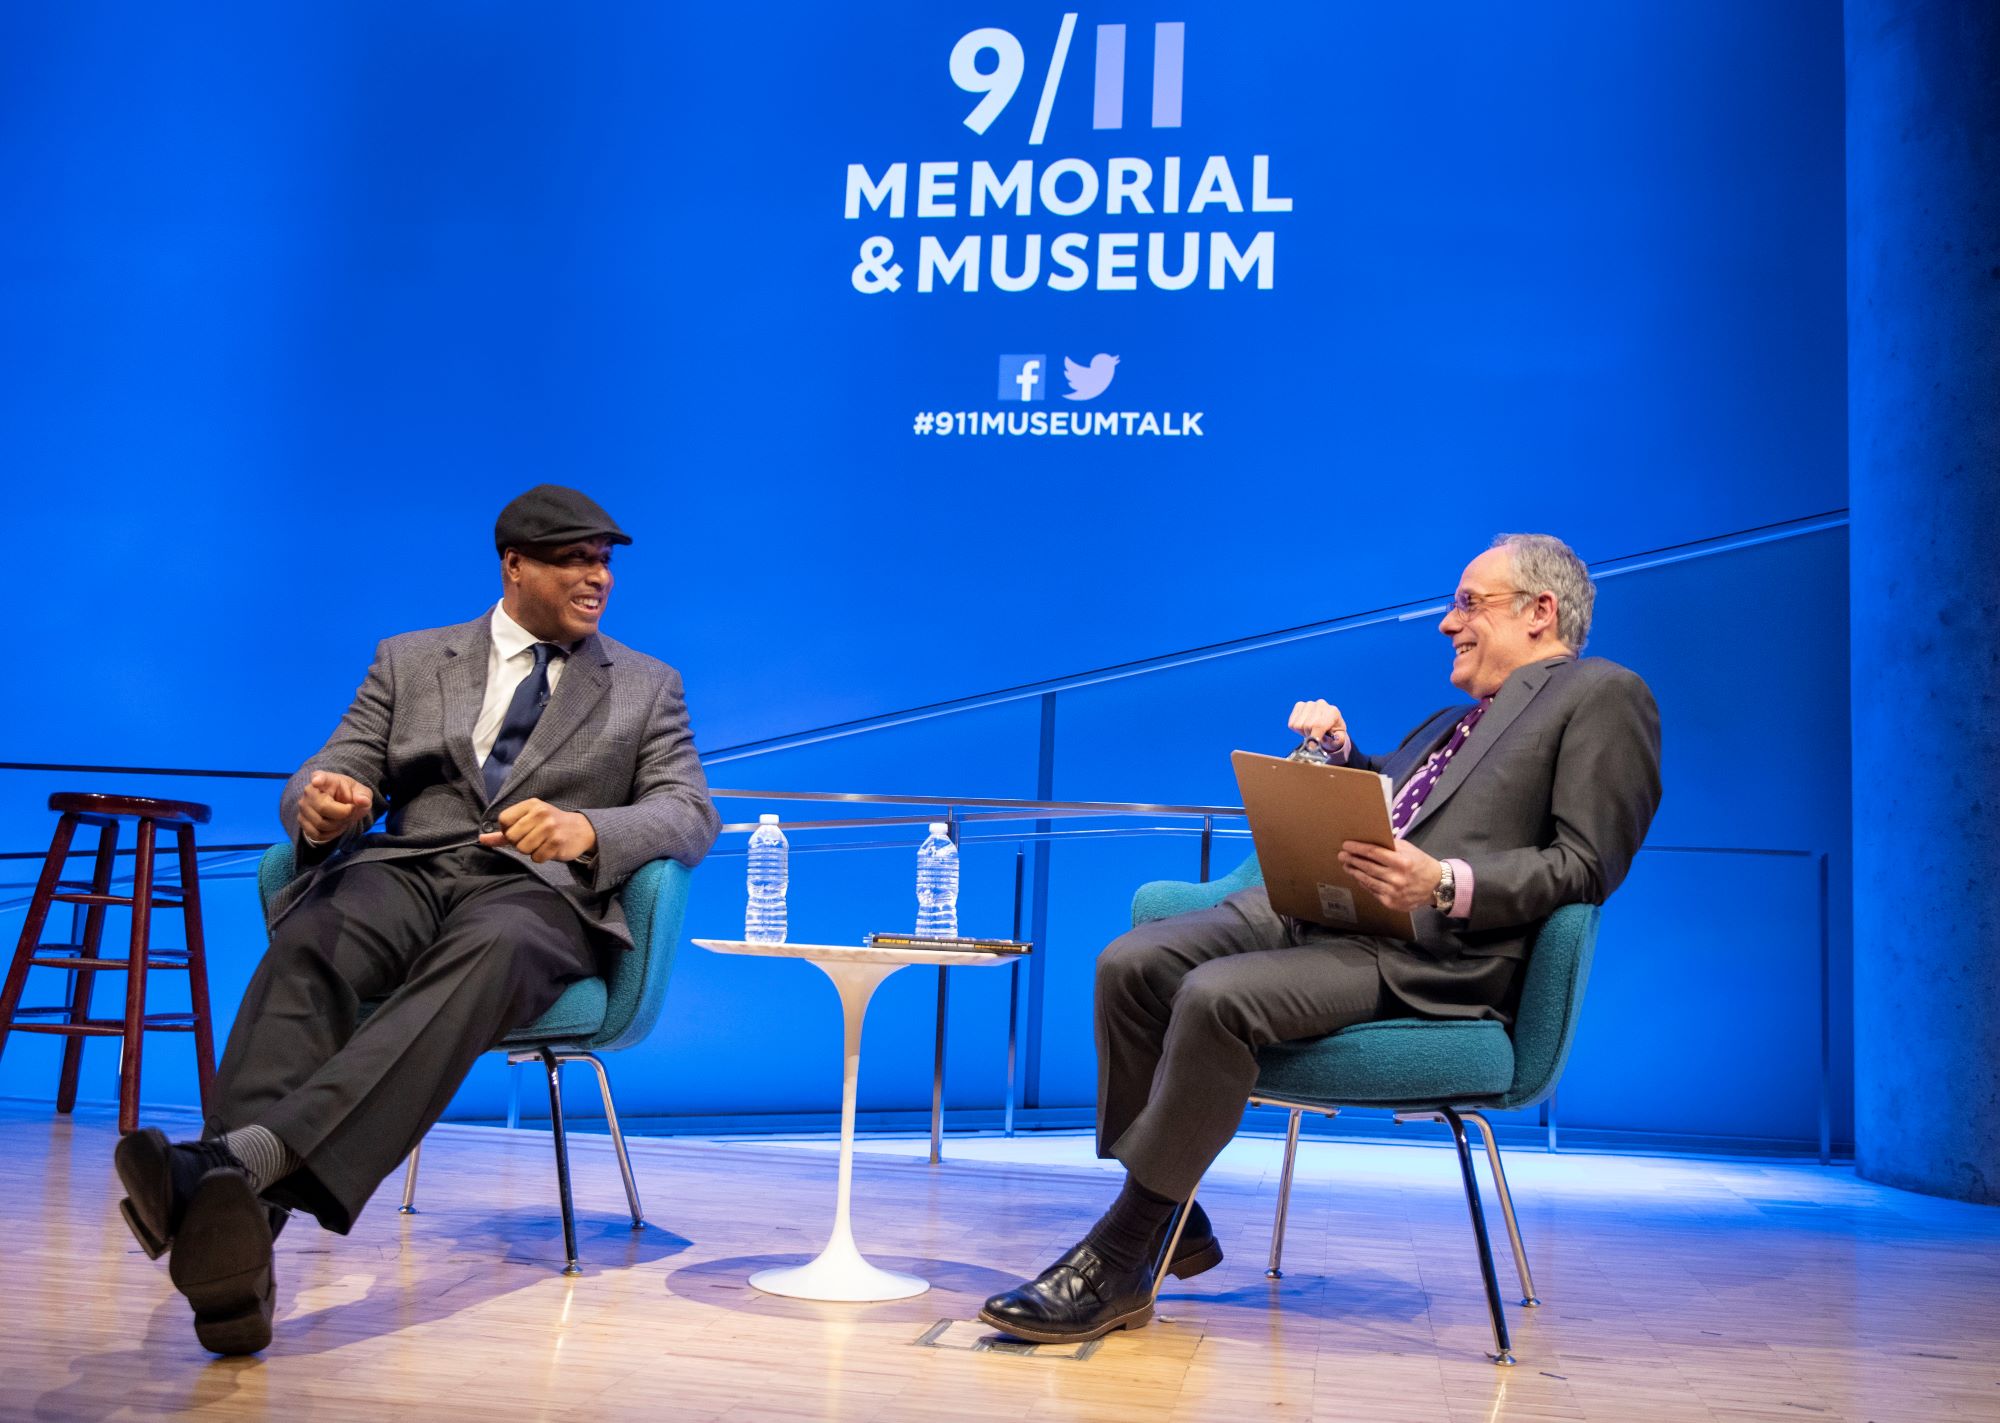 Former Yankees player Bernie Williams is interviewed by Clifford Chanin, the executive vice president and deputy director for museum programs, onstage at the Museum Auditorium. Williams is sitting with his feet out and crossed while Chanin is smiling and holding a clipboard.